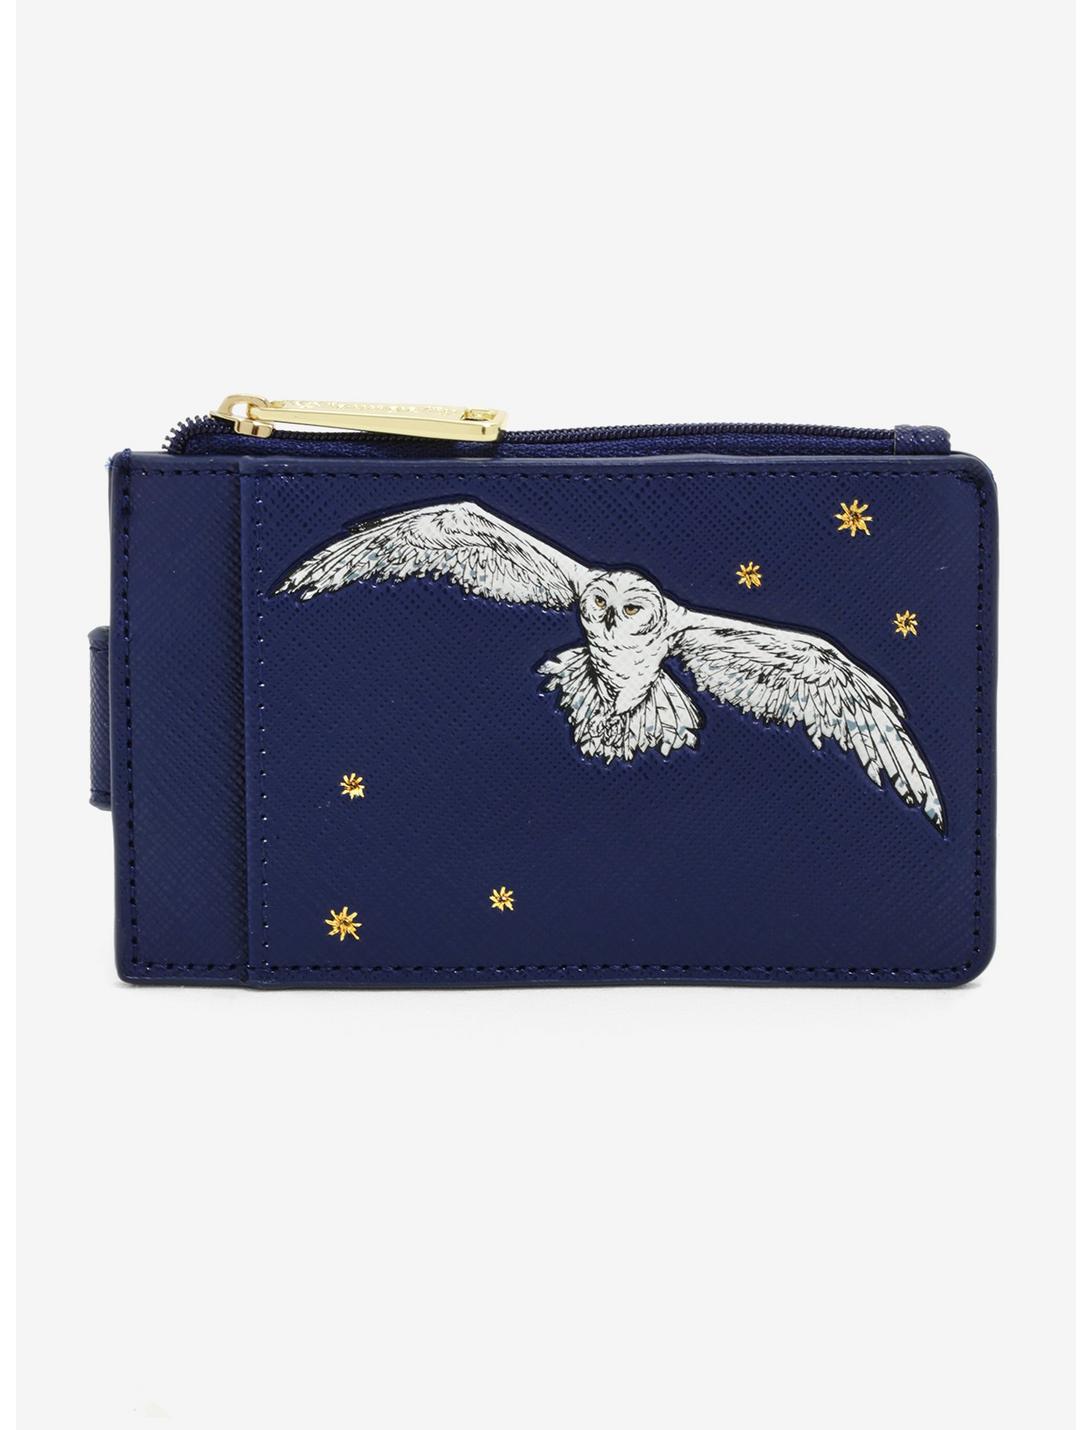 Loungefly Harry Potter Hedwig Cardholder - BoxLunch Exclusive, , hi-res